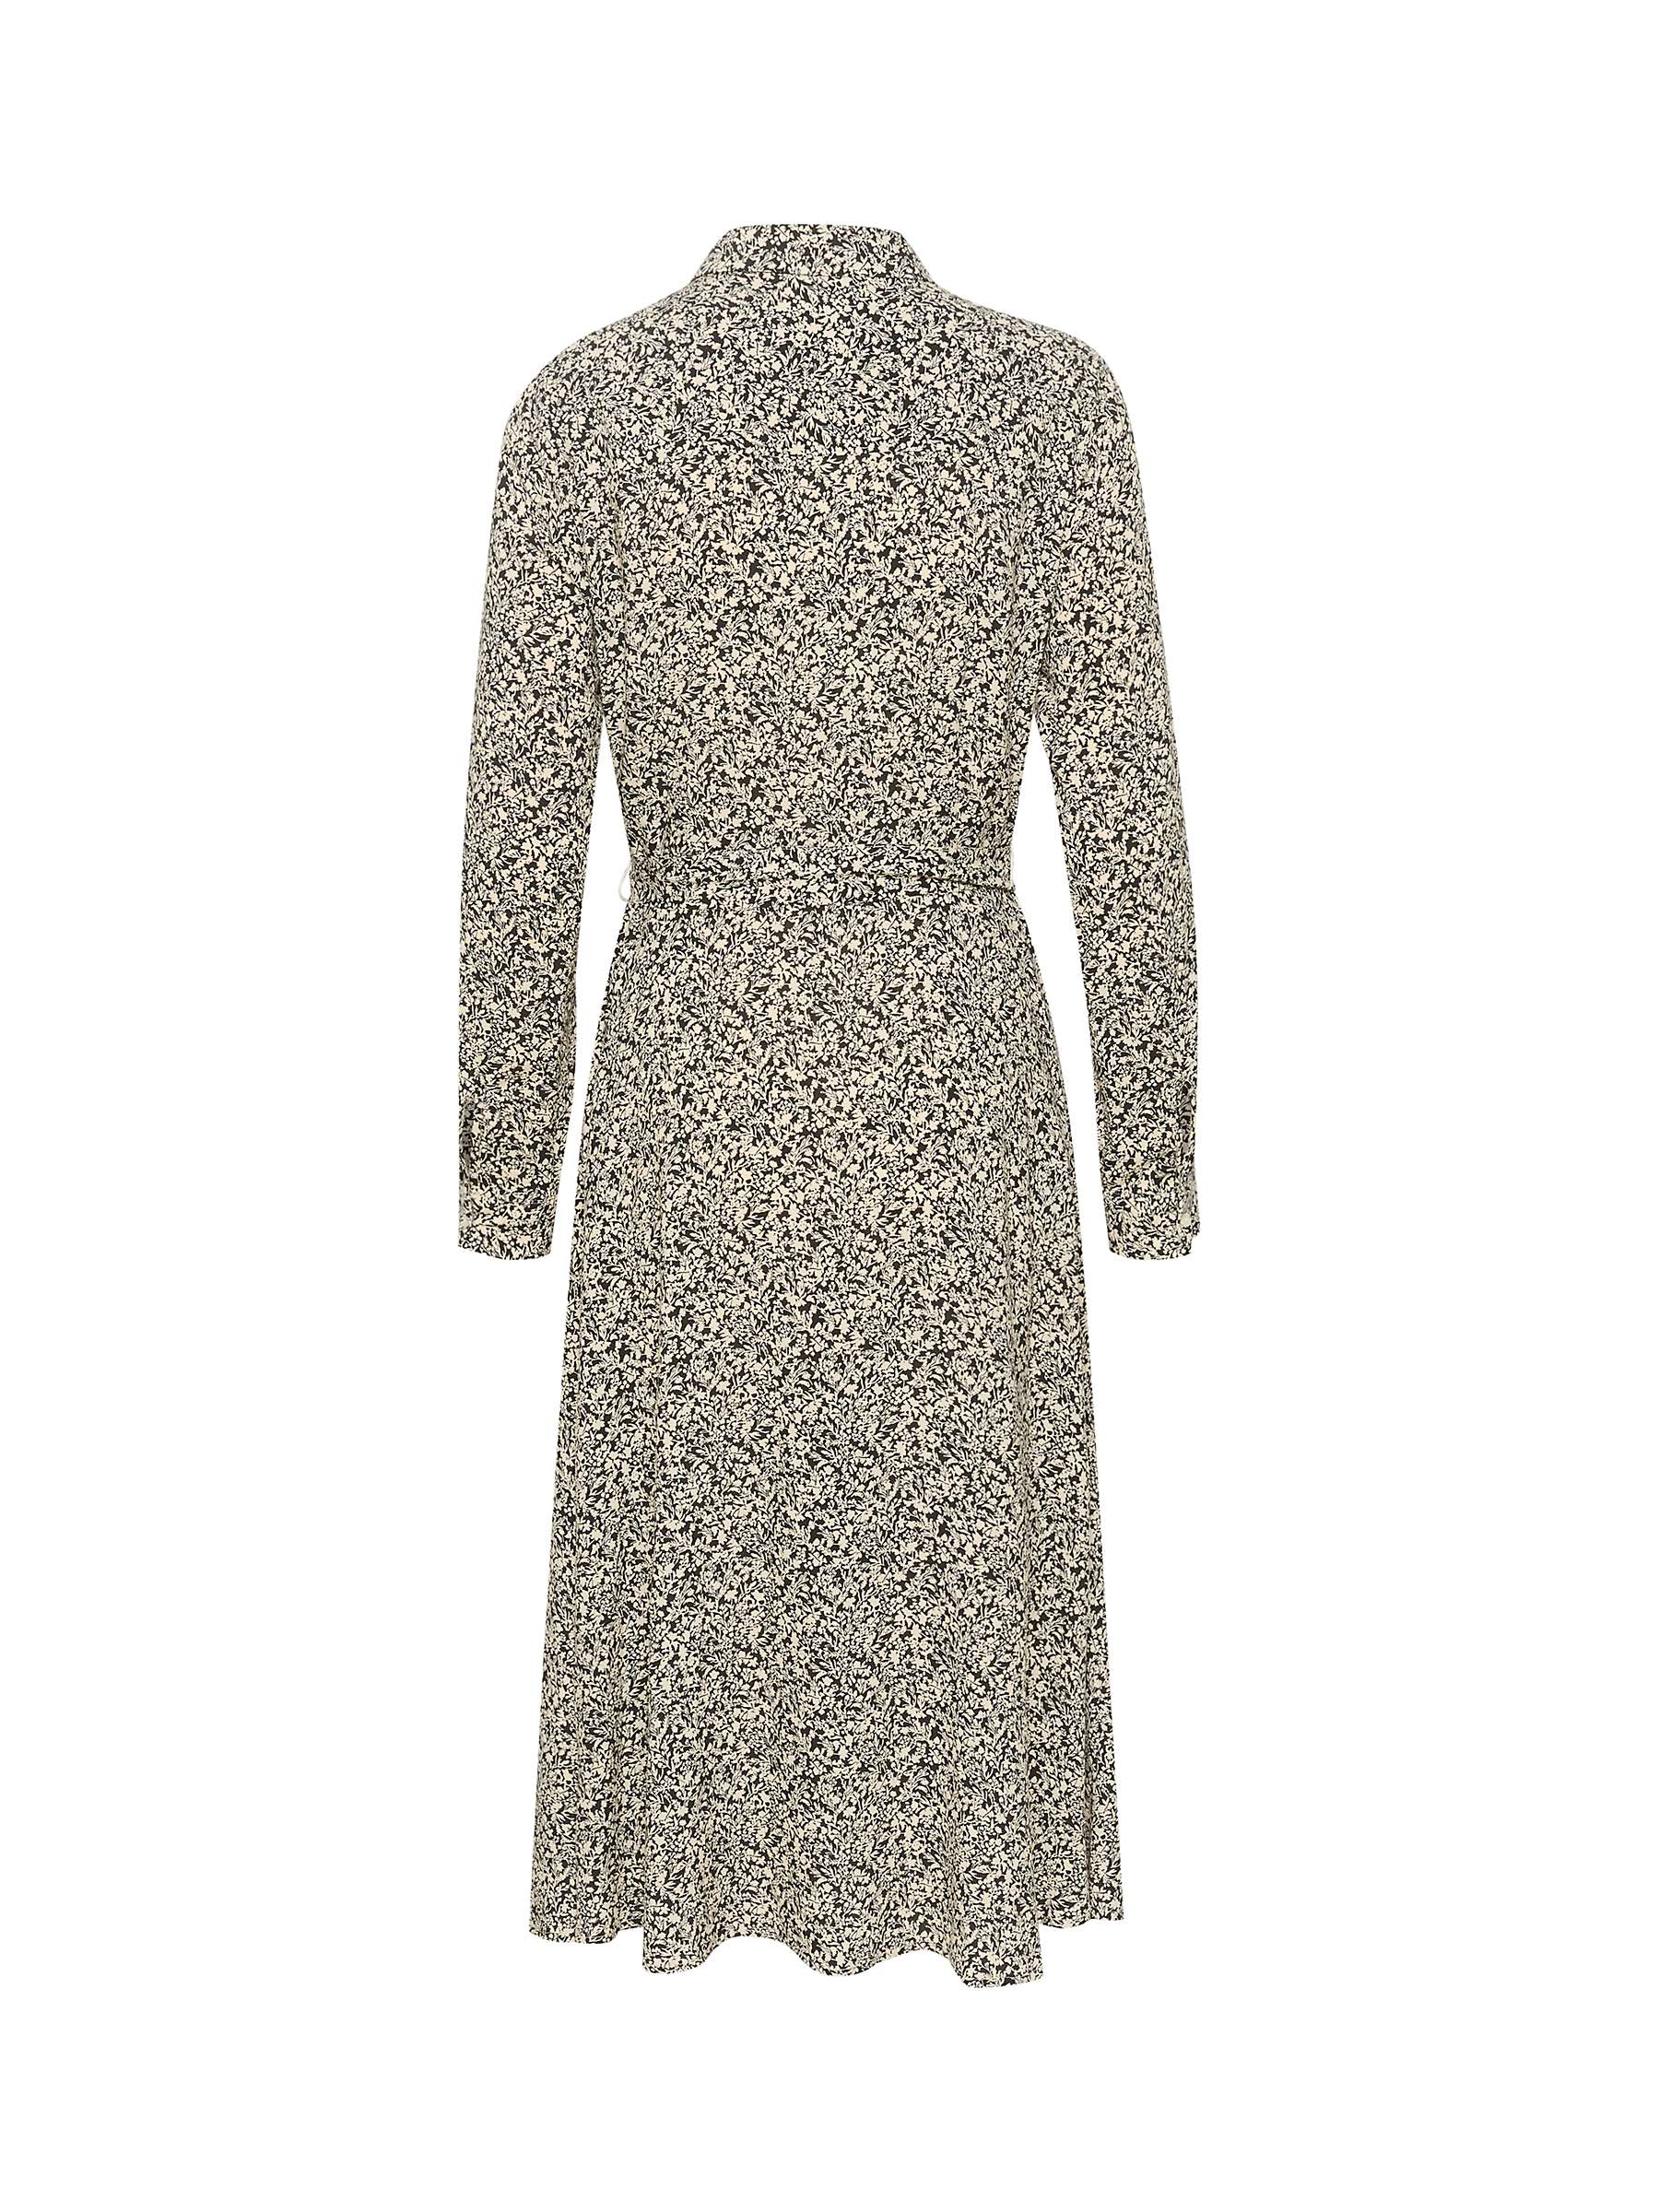 Buy Part Two Shelby Ecovero Shirt Dress Online at johnlewis.com